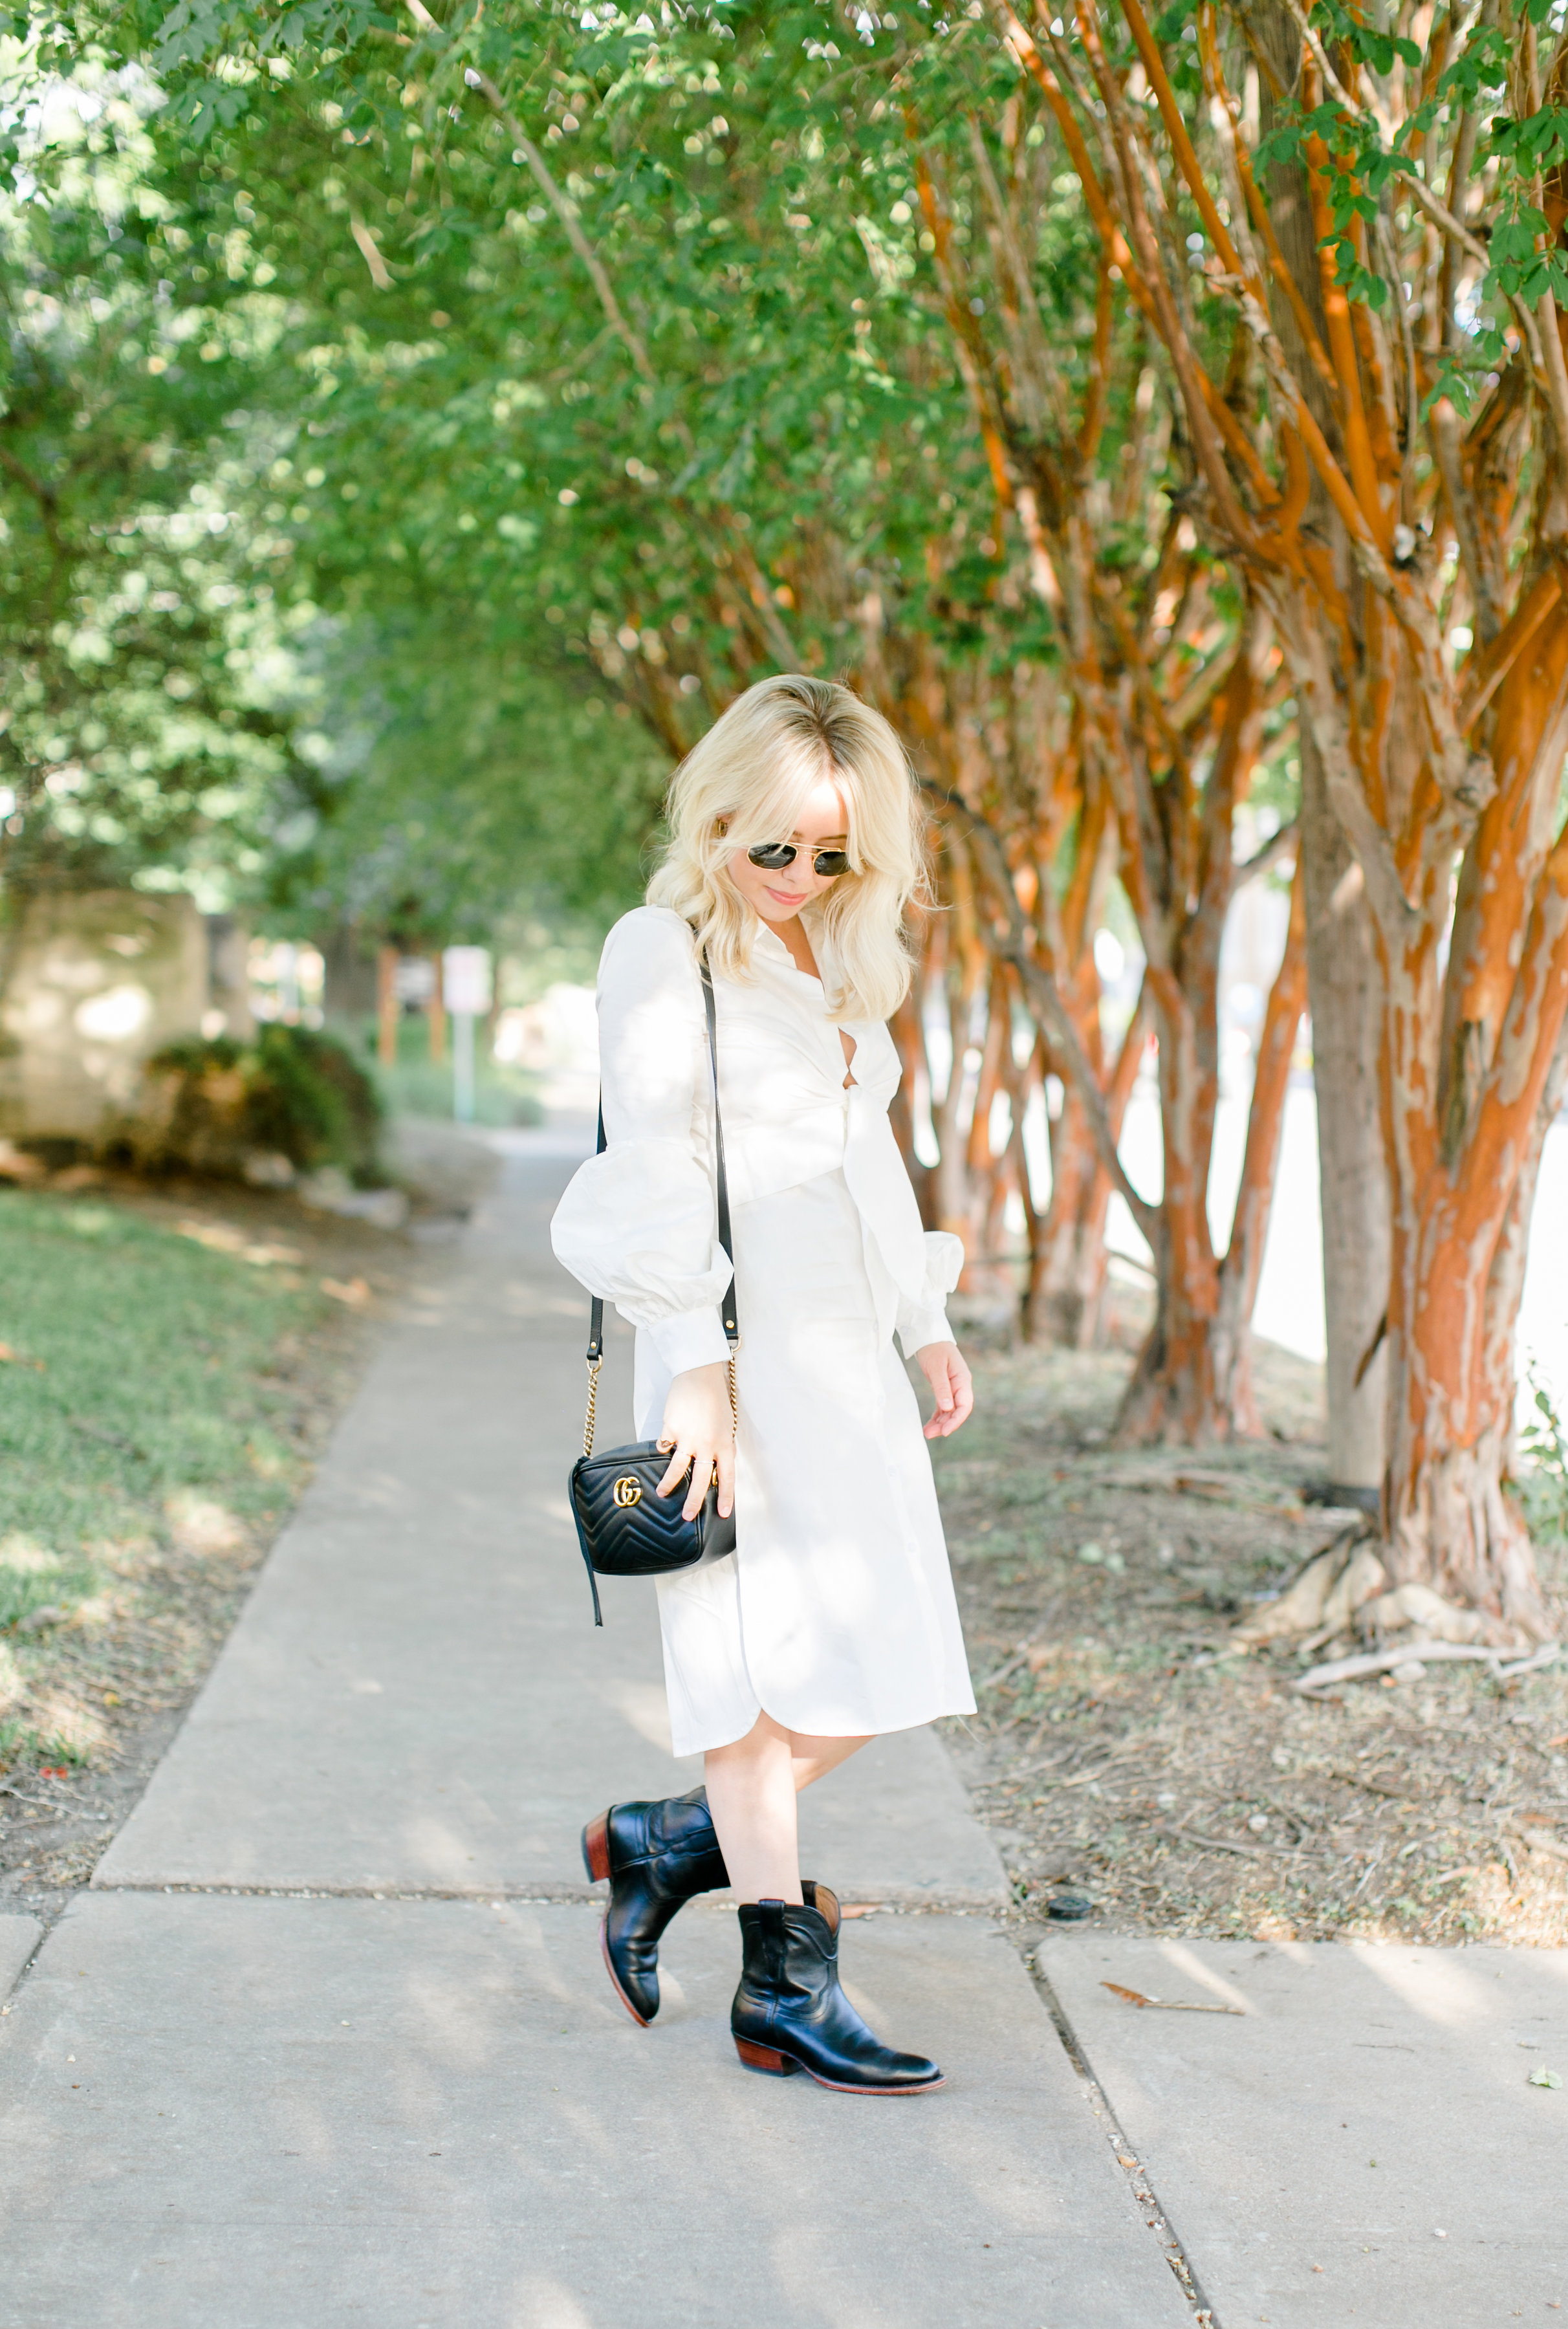 White Boots Are the Secret to Transitional Dressing - theFashionSpot